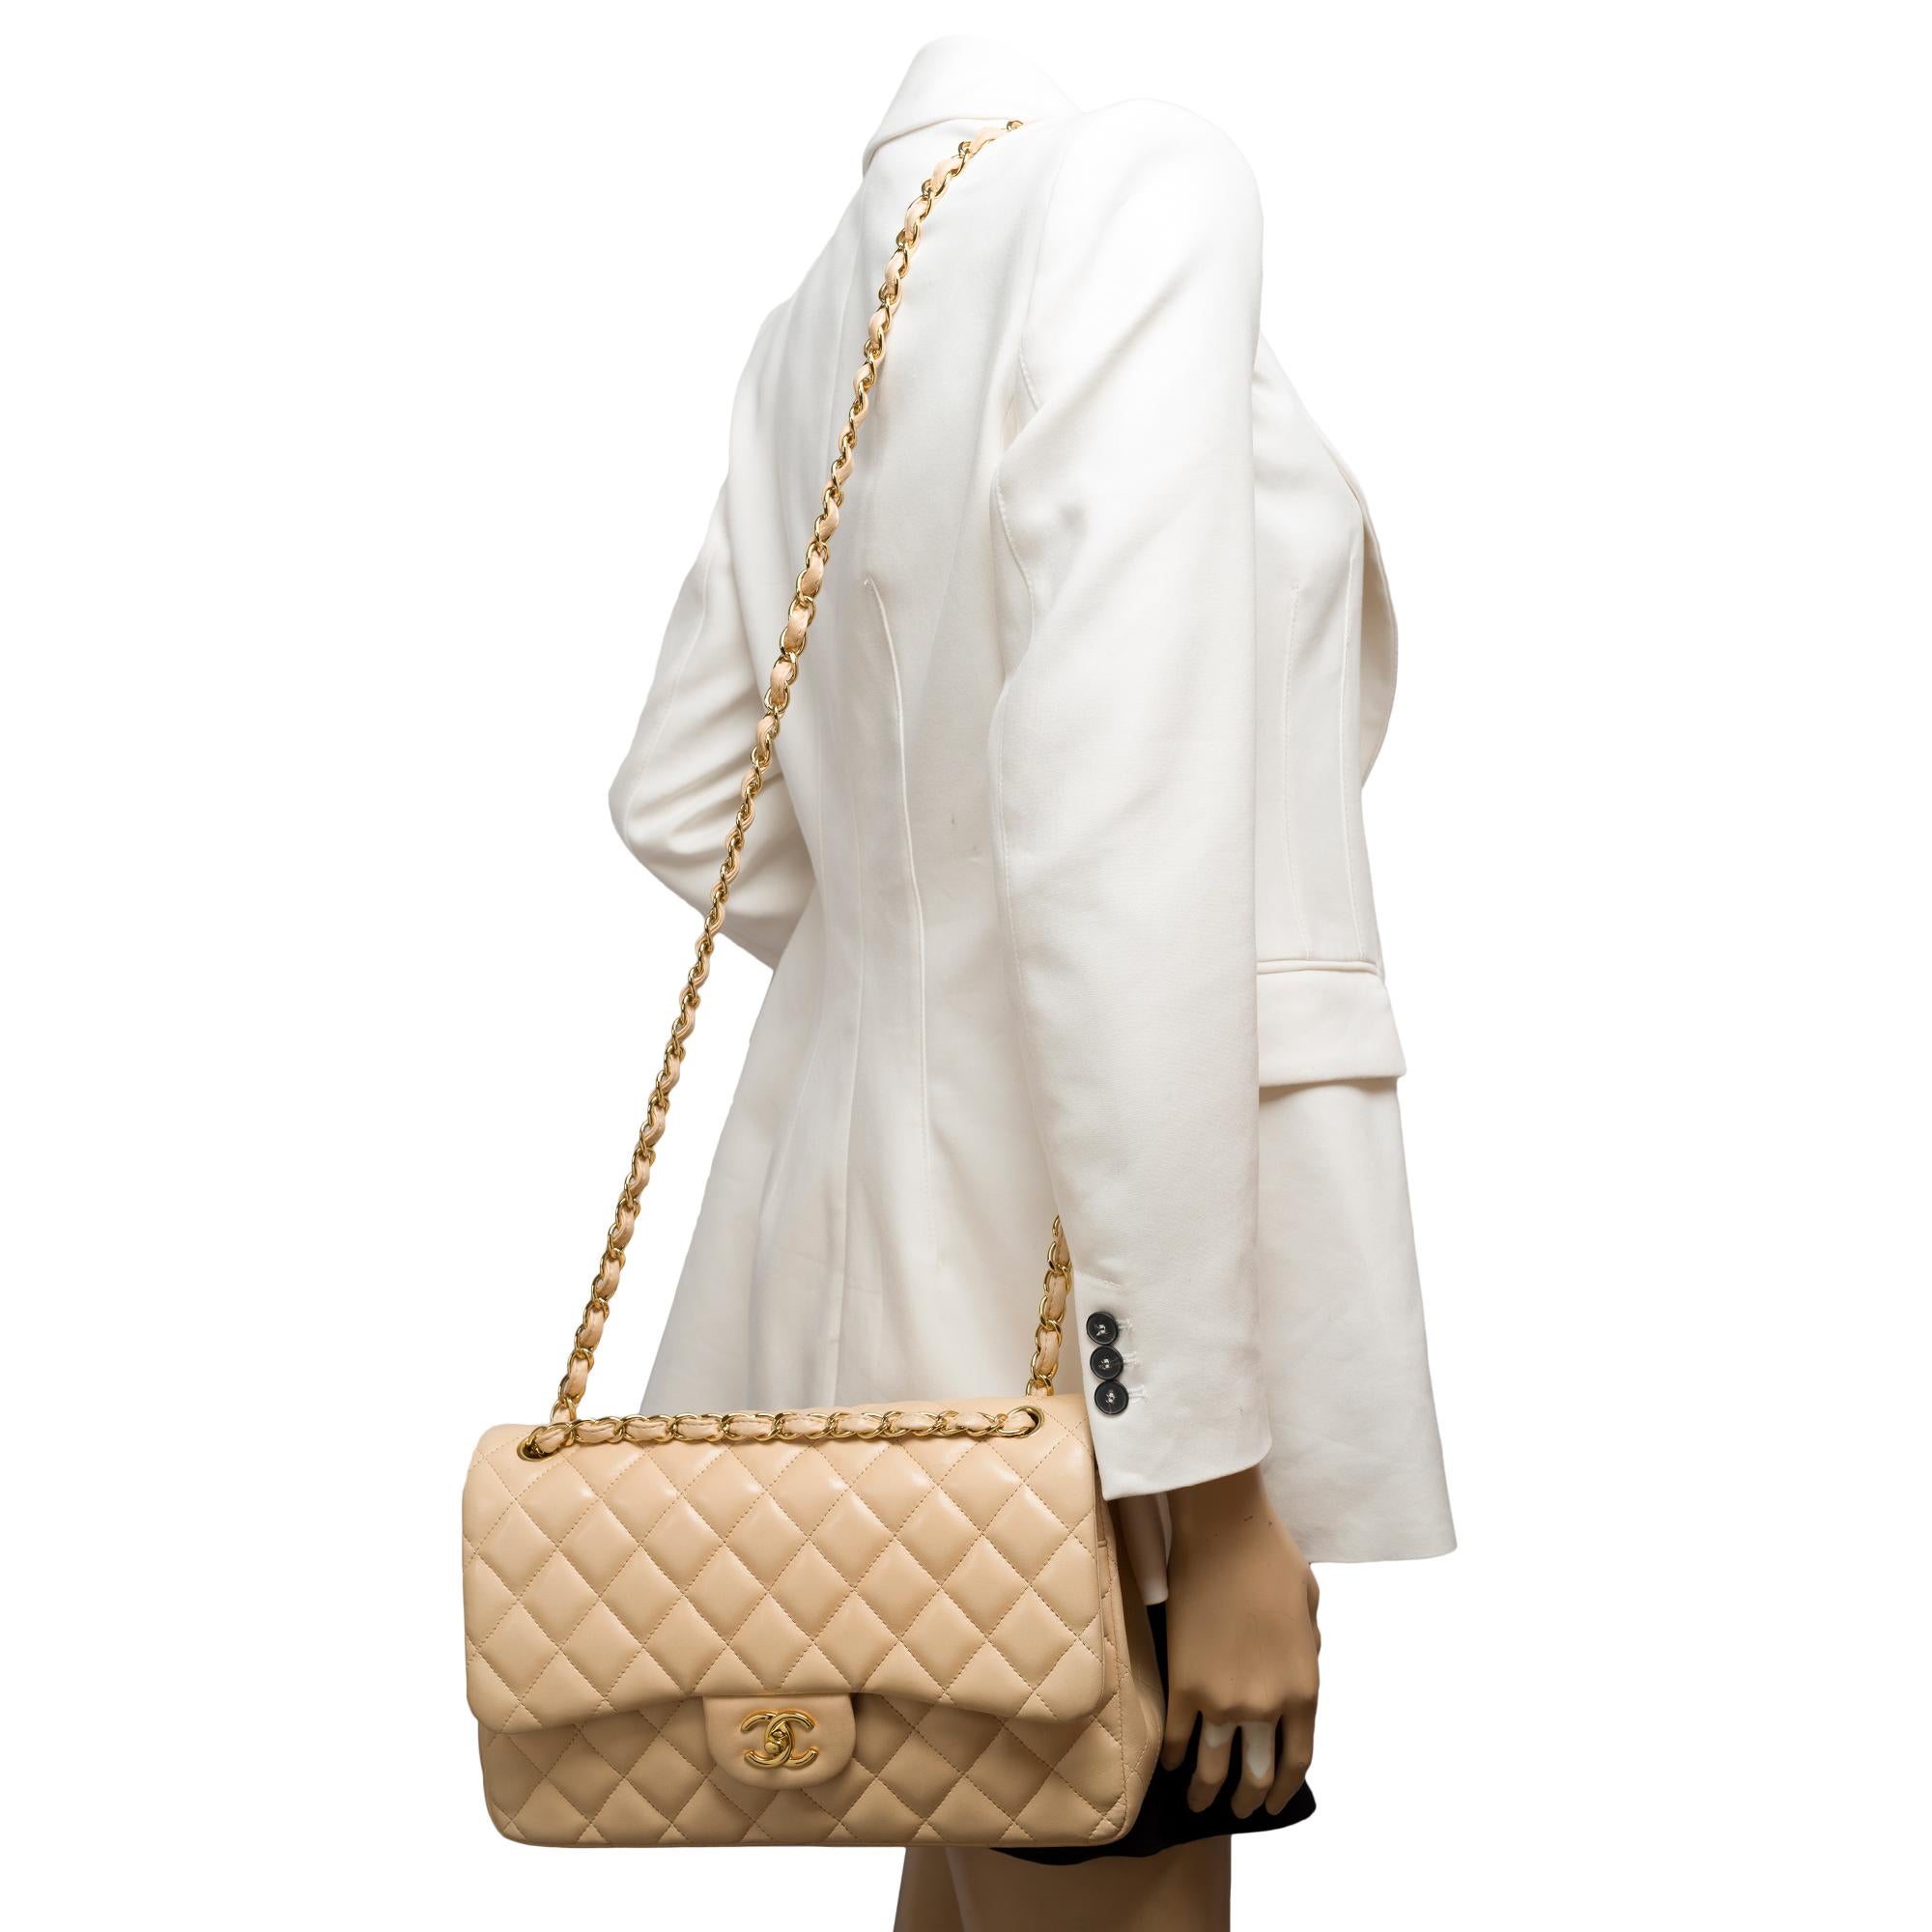 Chanel Timeless Jumbo double flap shoulder bag in beige quilted lambskin, GHW 9